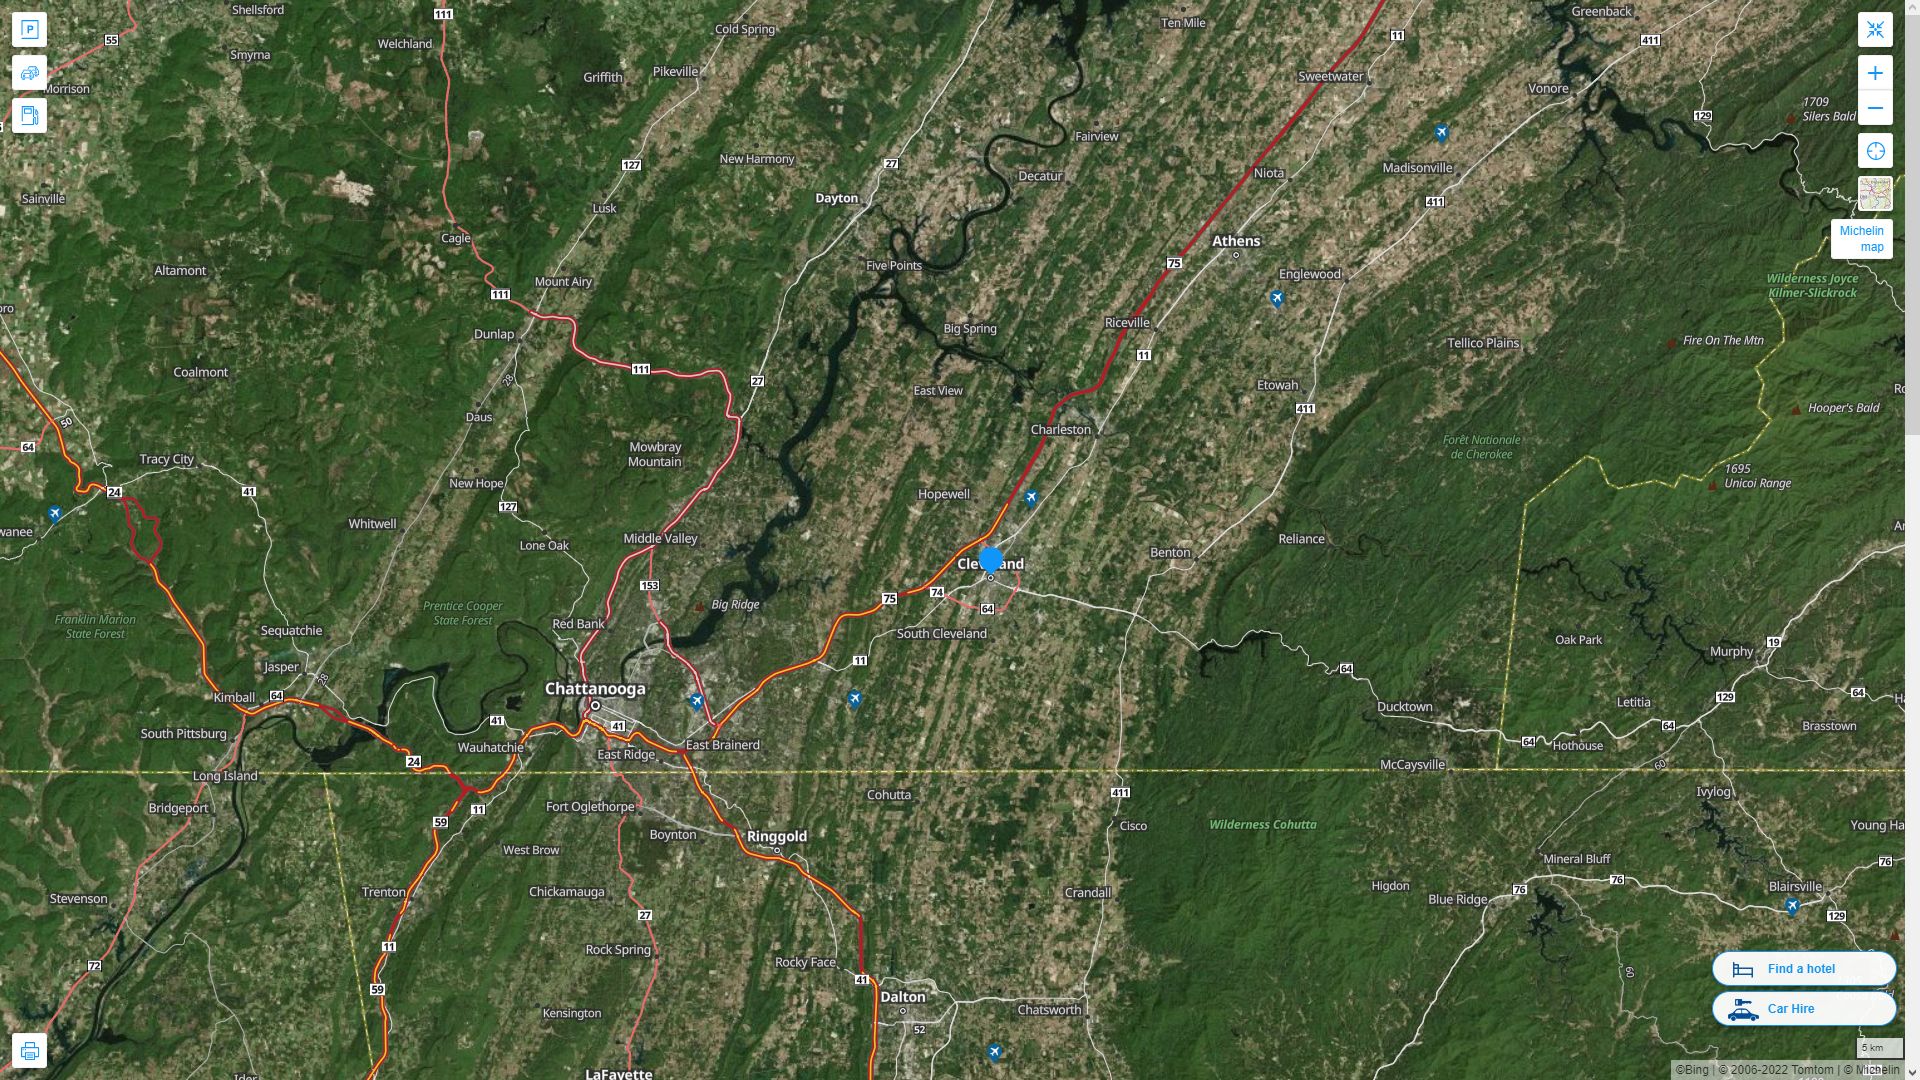 Cleveland Tennessee Highway and Road Map with Satellite View